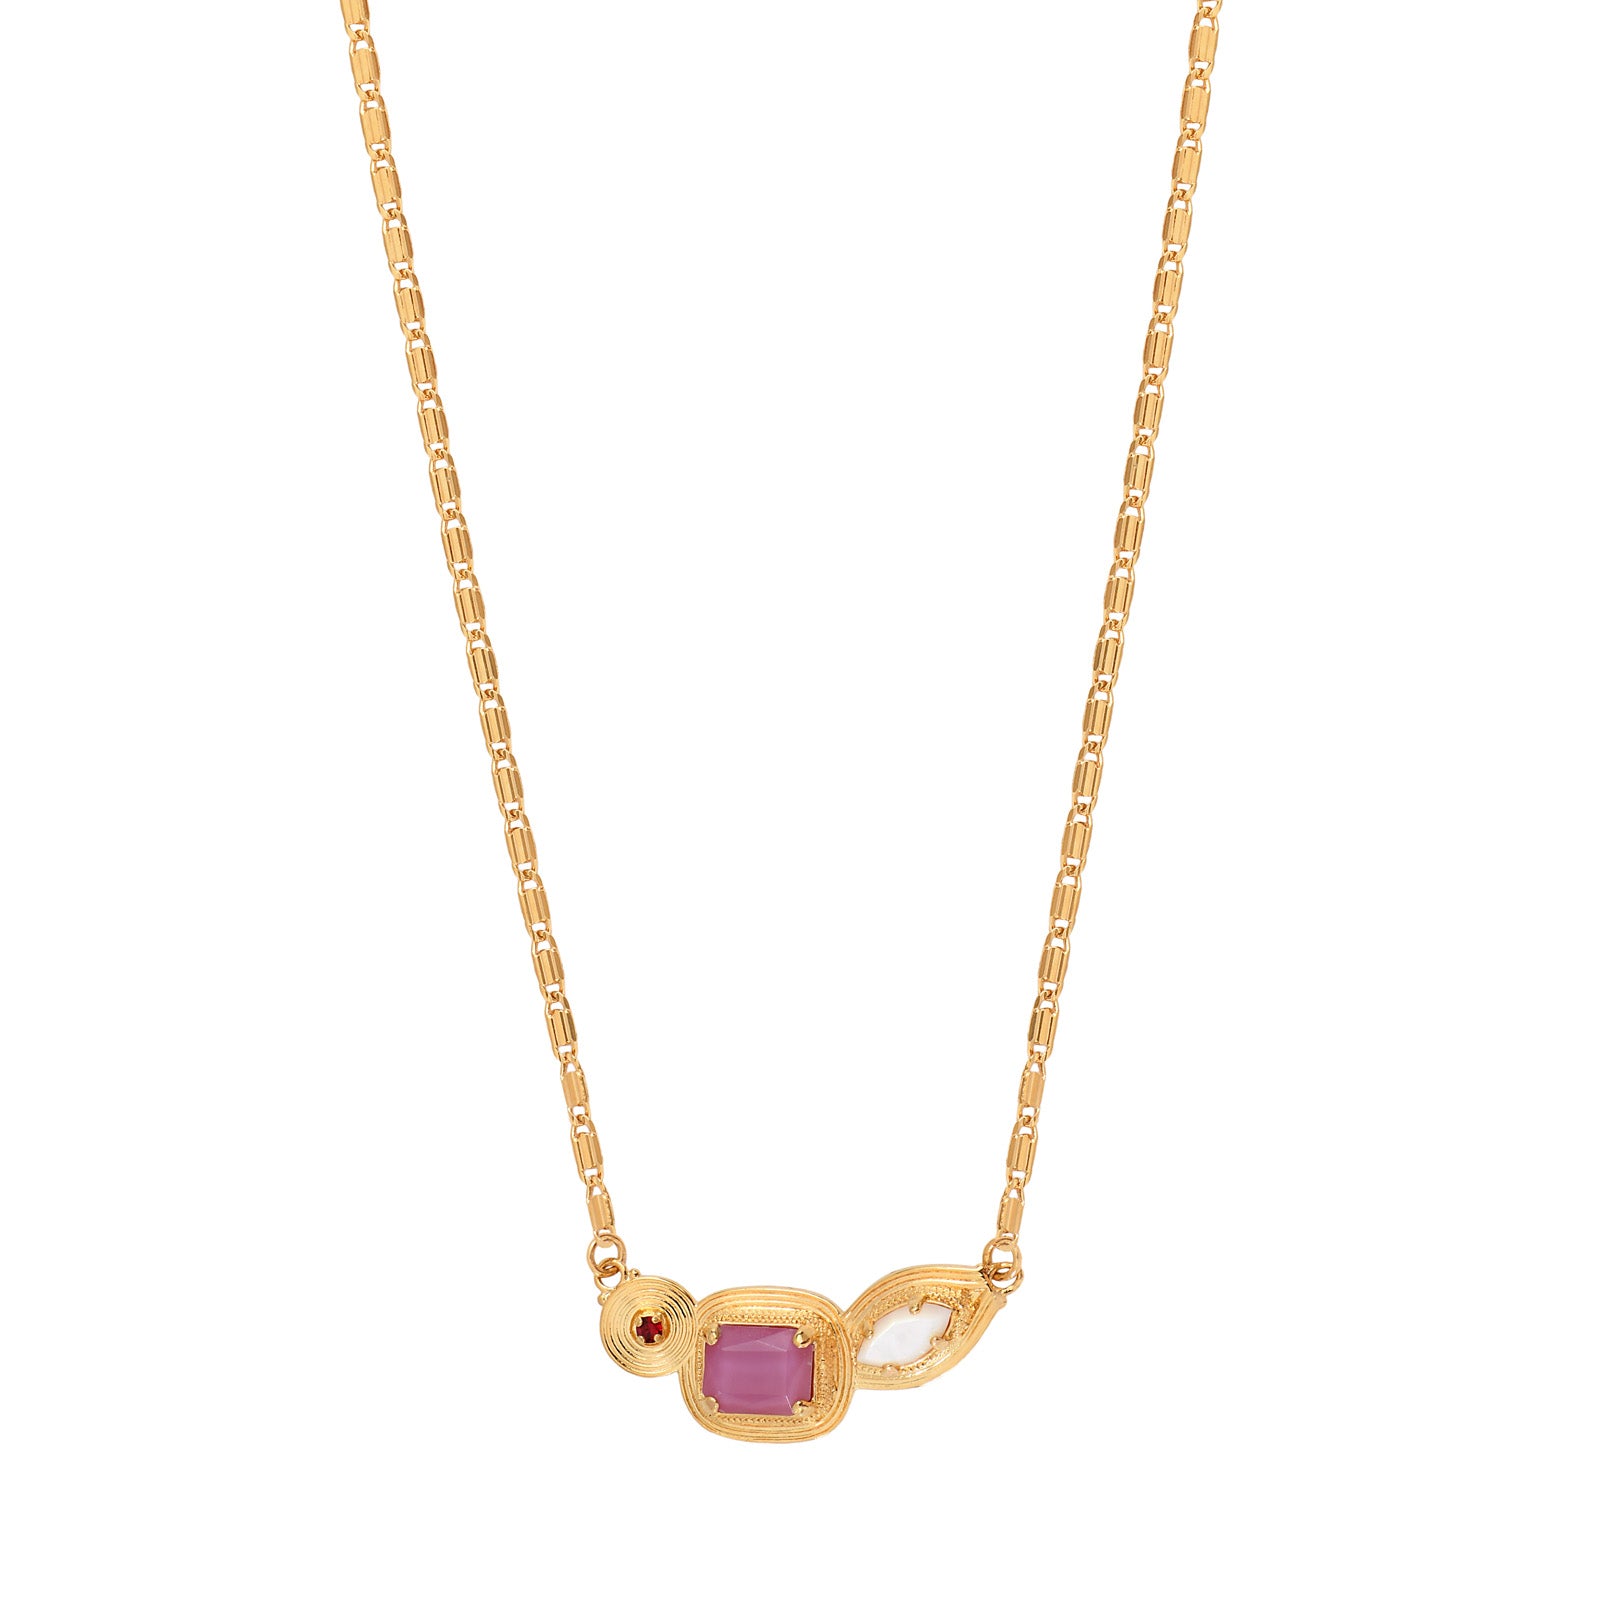 Three shape stone necklace in pink